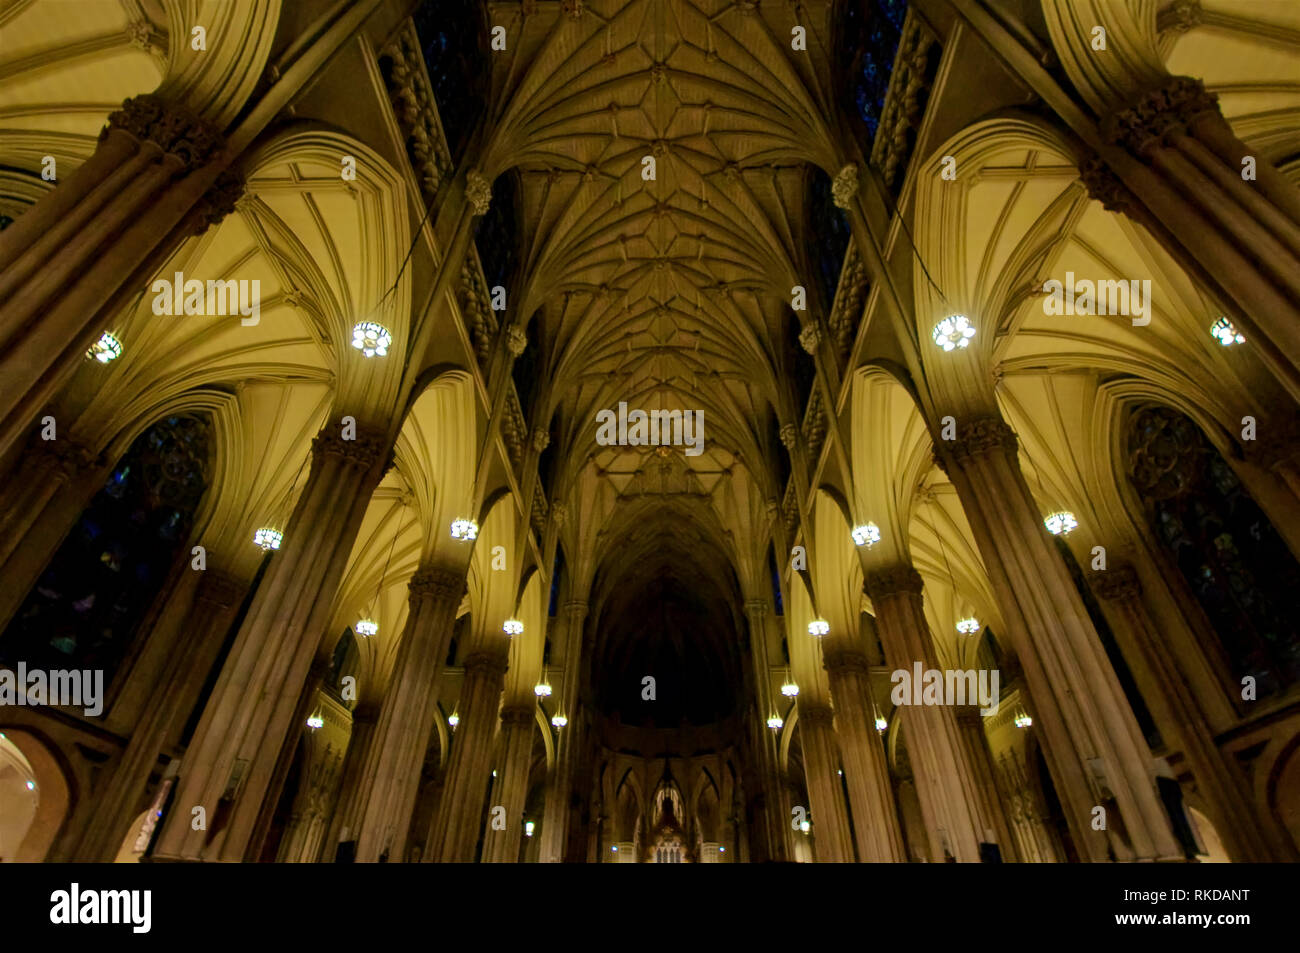 The vaulted ceiling of St. Patrick's Cathedral, a Catholic church, on 5th Avenue in New York, New York. Stock Photo